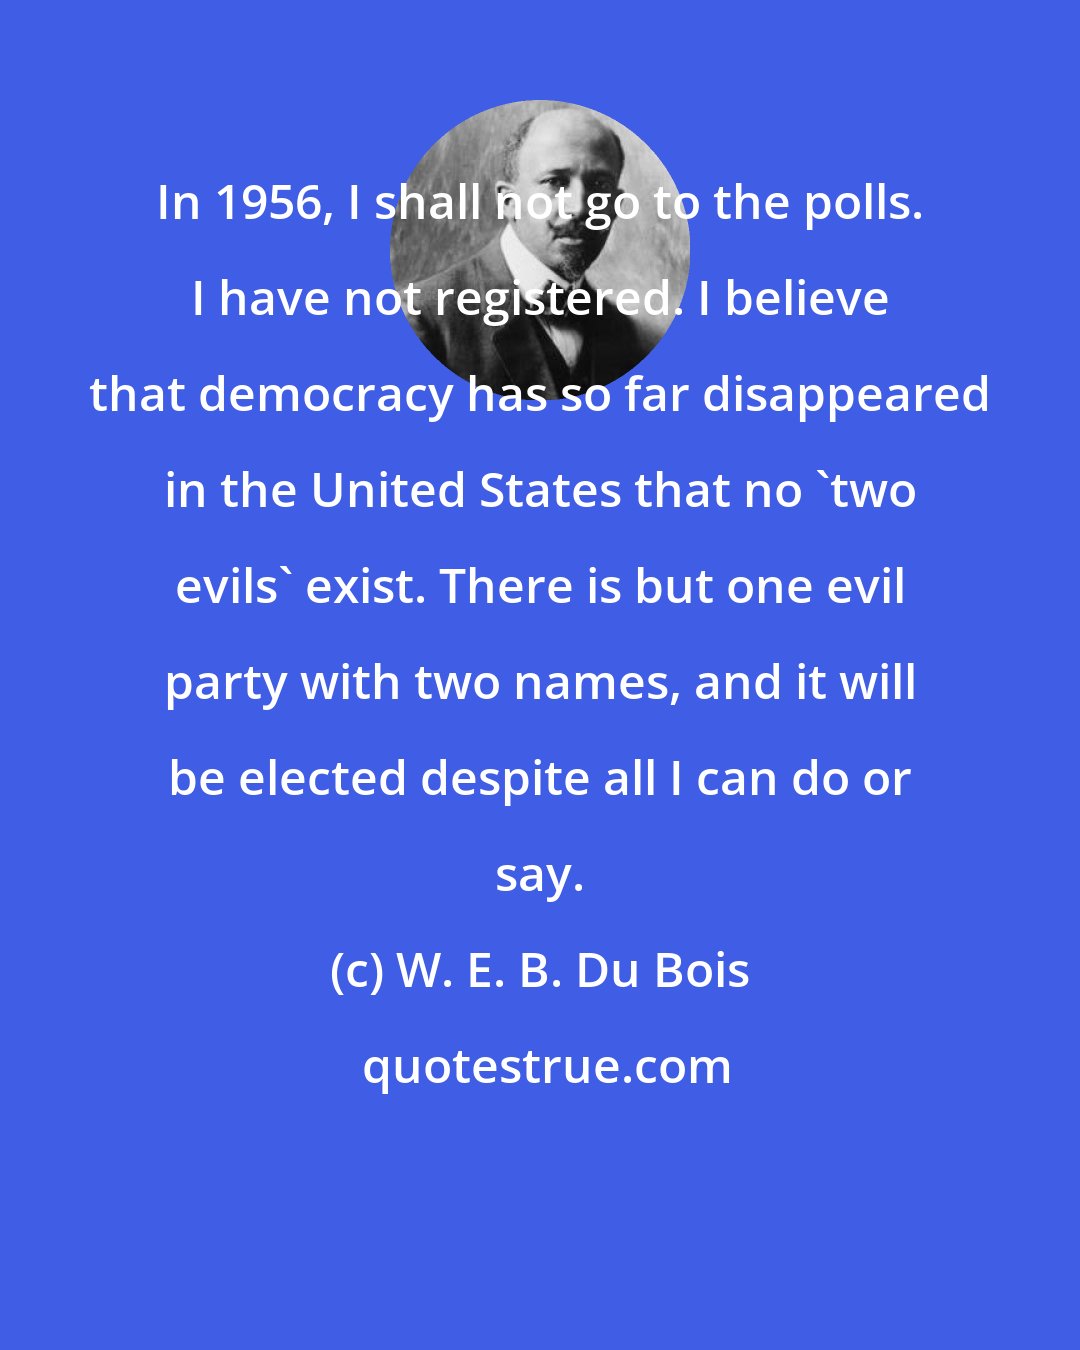 W. E. B. Du Bois: In 1956, I shall not go to the polls. I have not registered. I believe that democracy has so far disappeared in the United States that no 'two evils' exist. There is but one evil party with two names, and it will be elected despite all I can do or say.